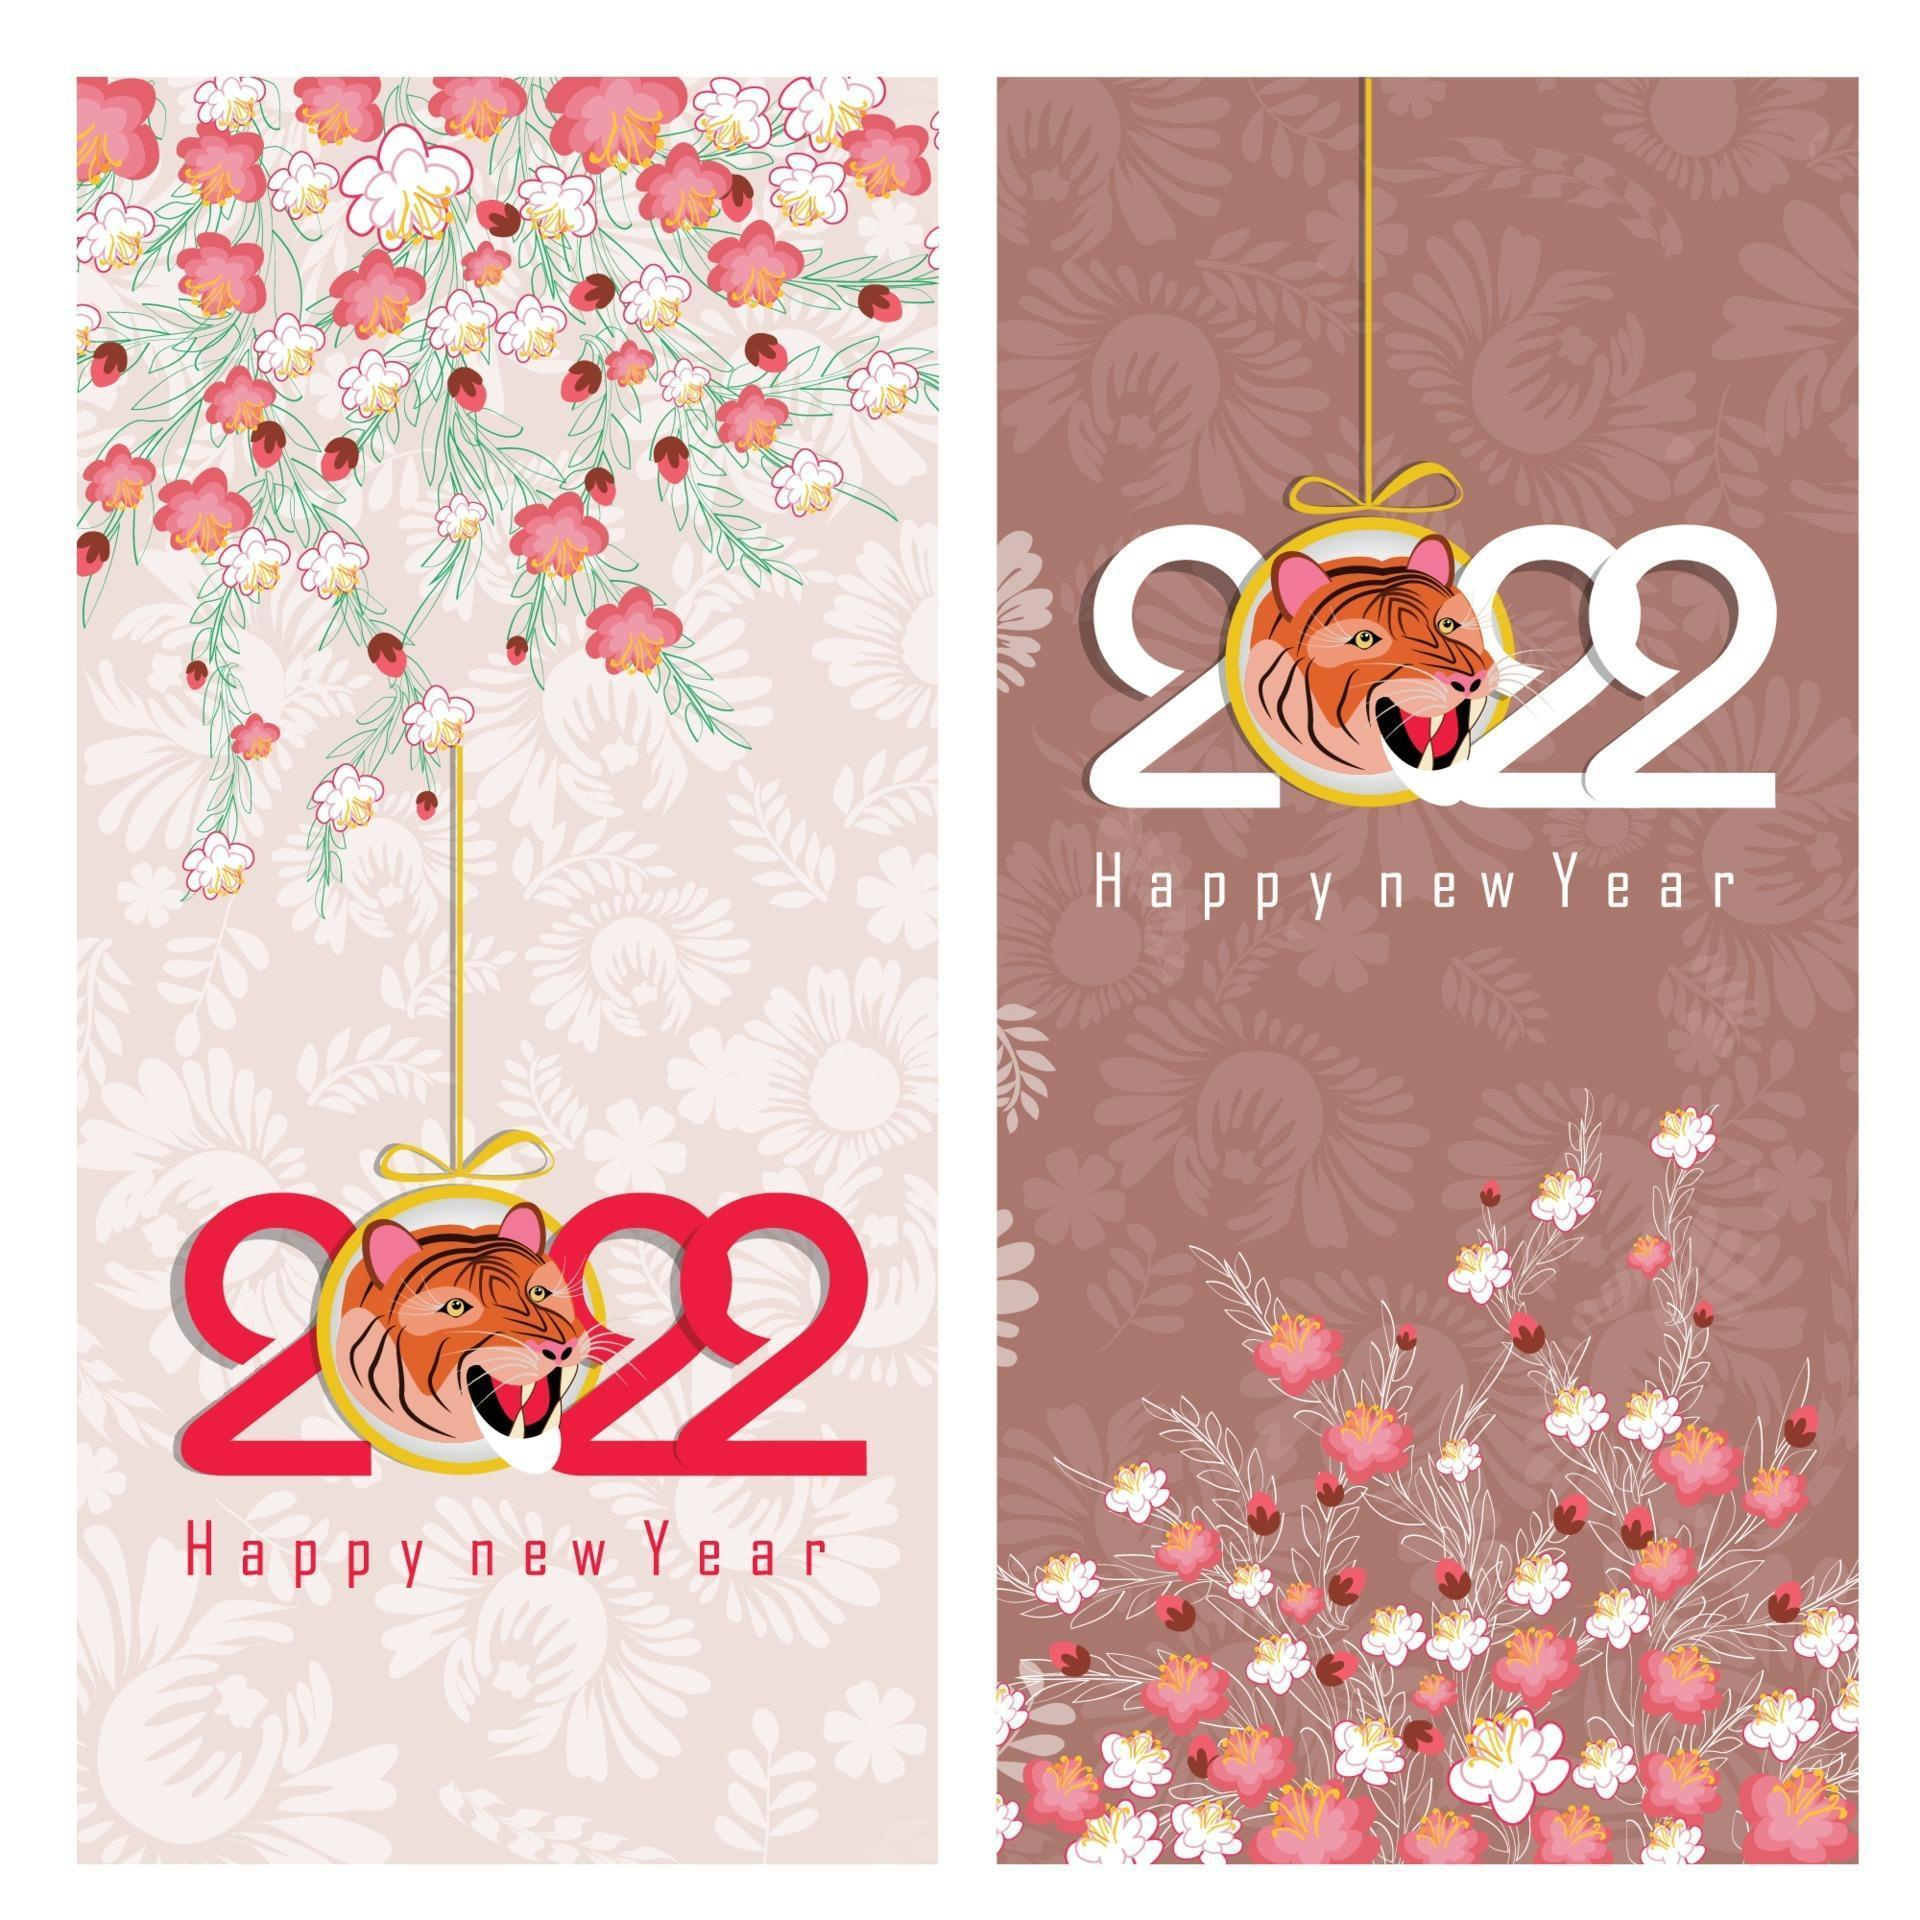 Happy Chinese New Year 2022 - Year Of The Tiger. Lunar New